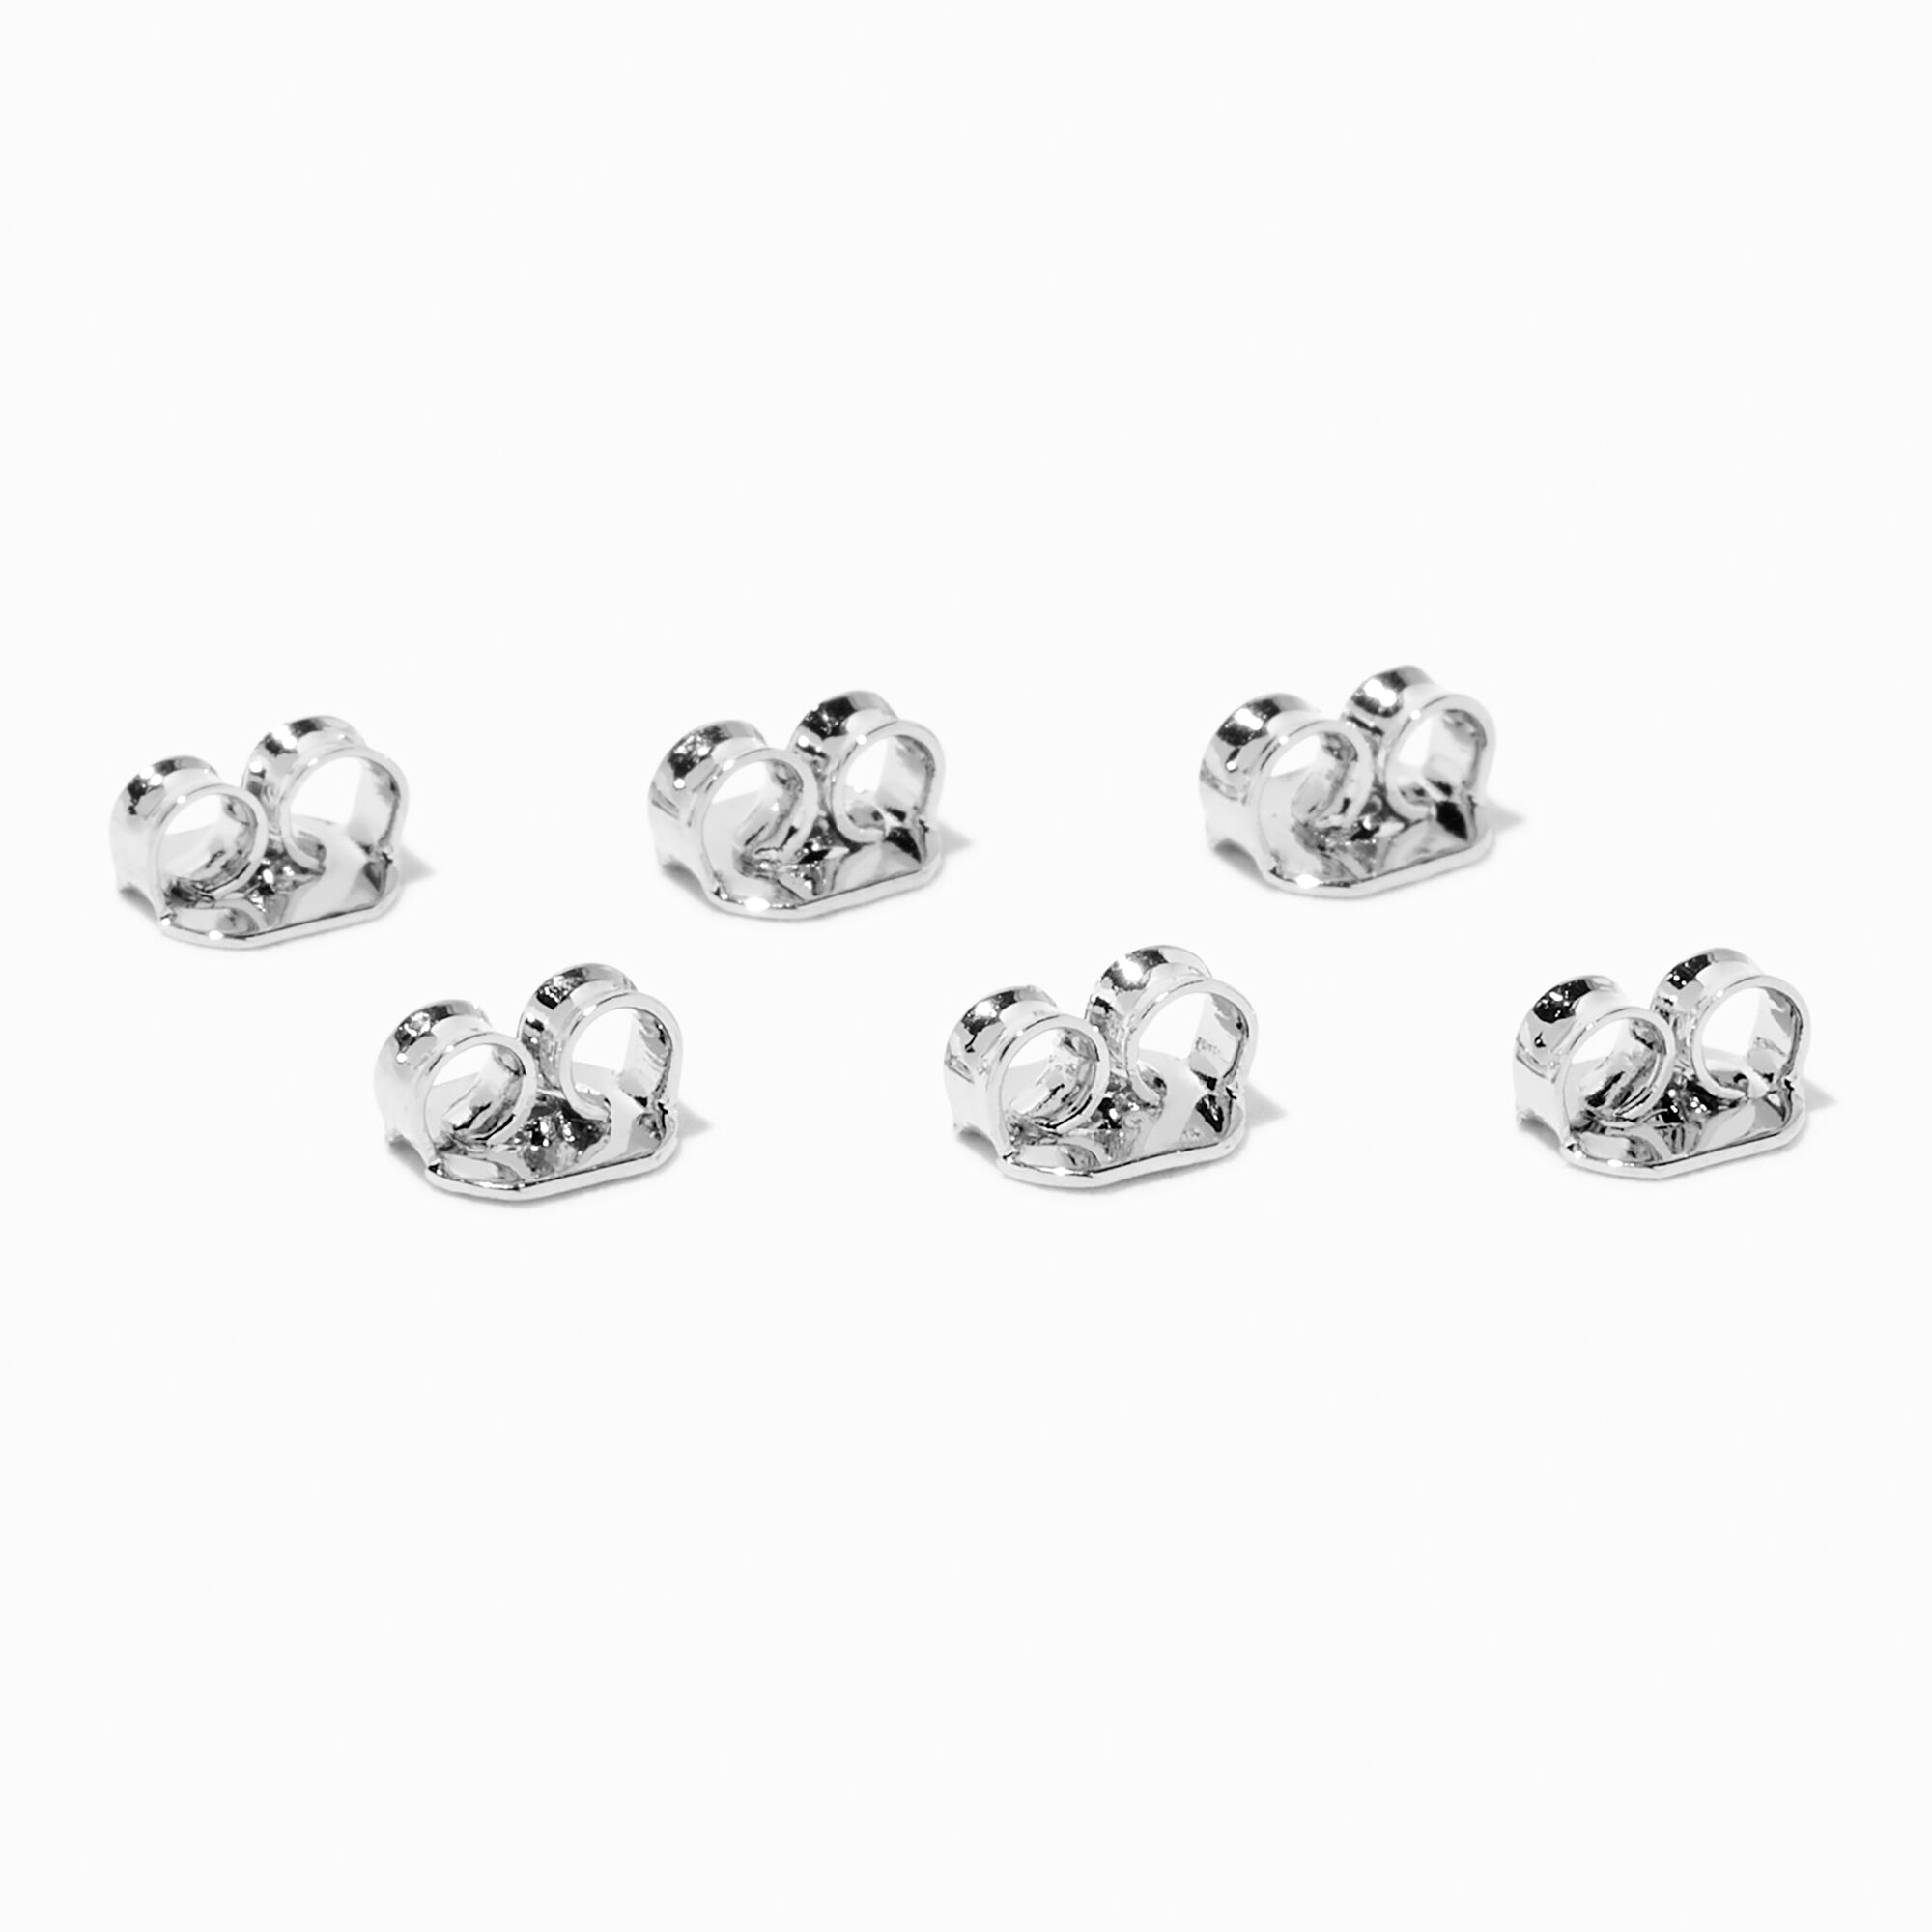 View Claires Titanium Earring Back Replacements 6 Pack Silver information